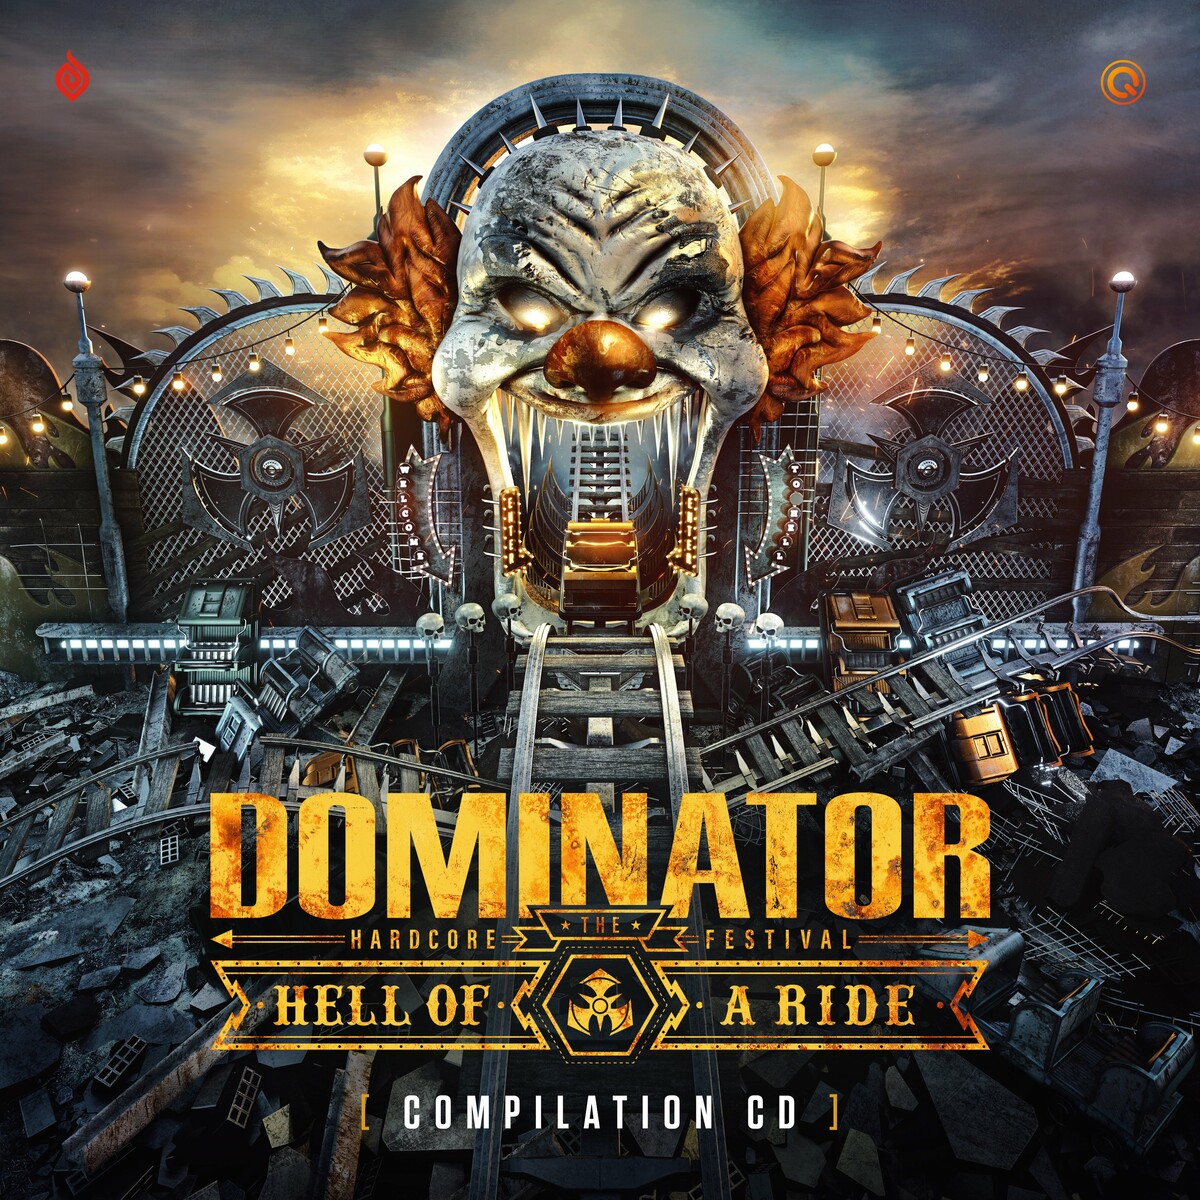 Dominator 2022 (hell of a ride